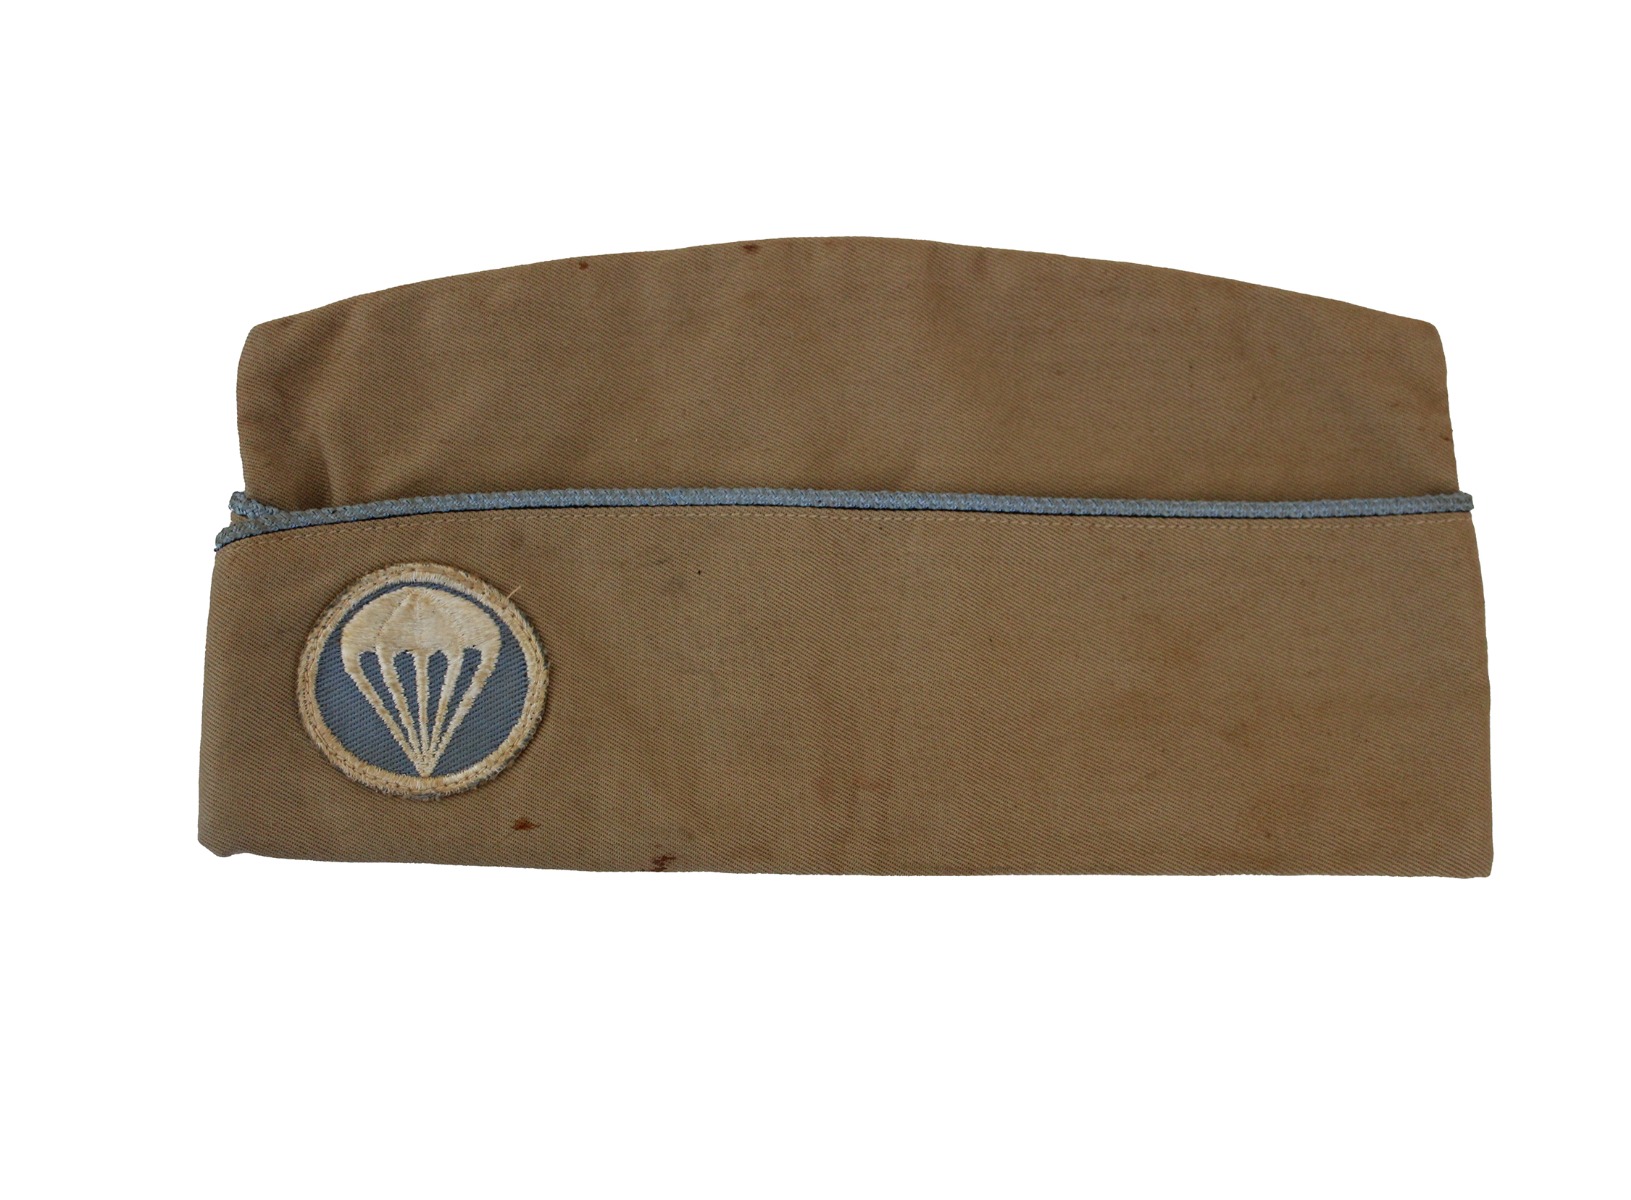 U.S. WWII PARATROOPER GARRISON CAP WITH BLUE PIPING AND CAP BADGE